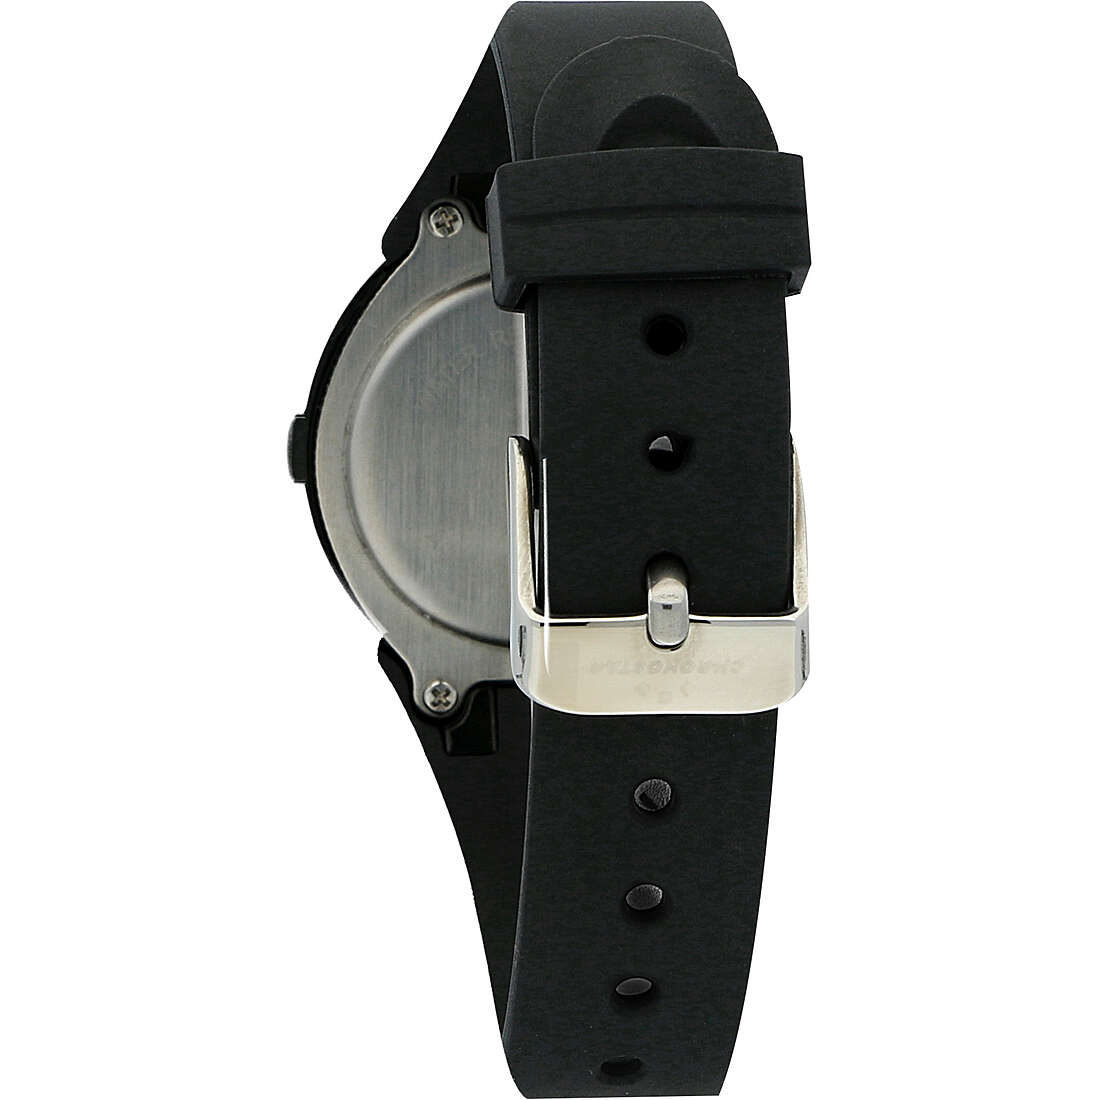 only time watch Metal Black dial woman Teenager R3851262501